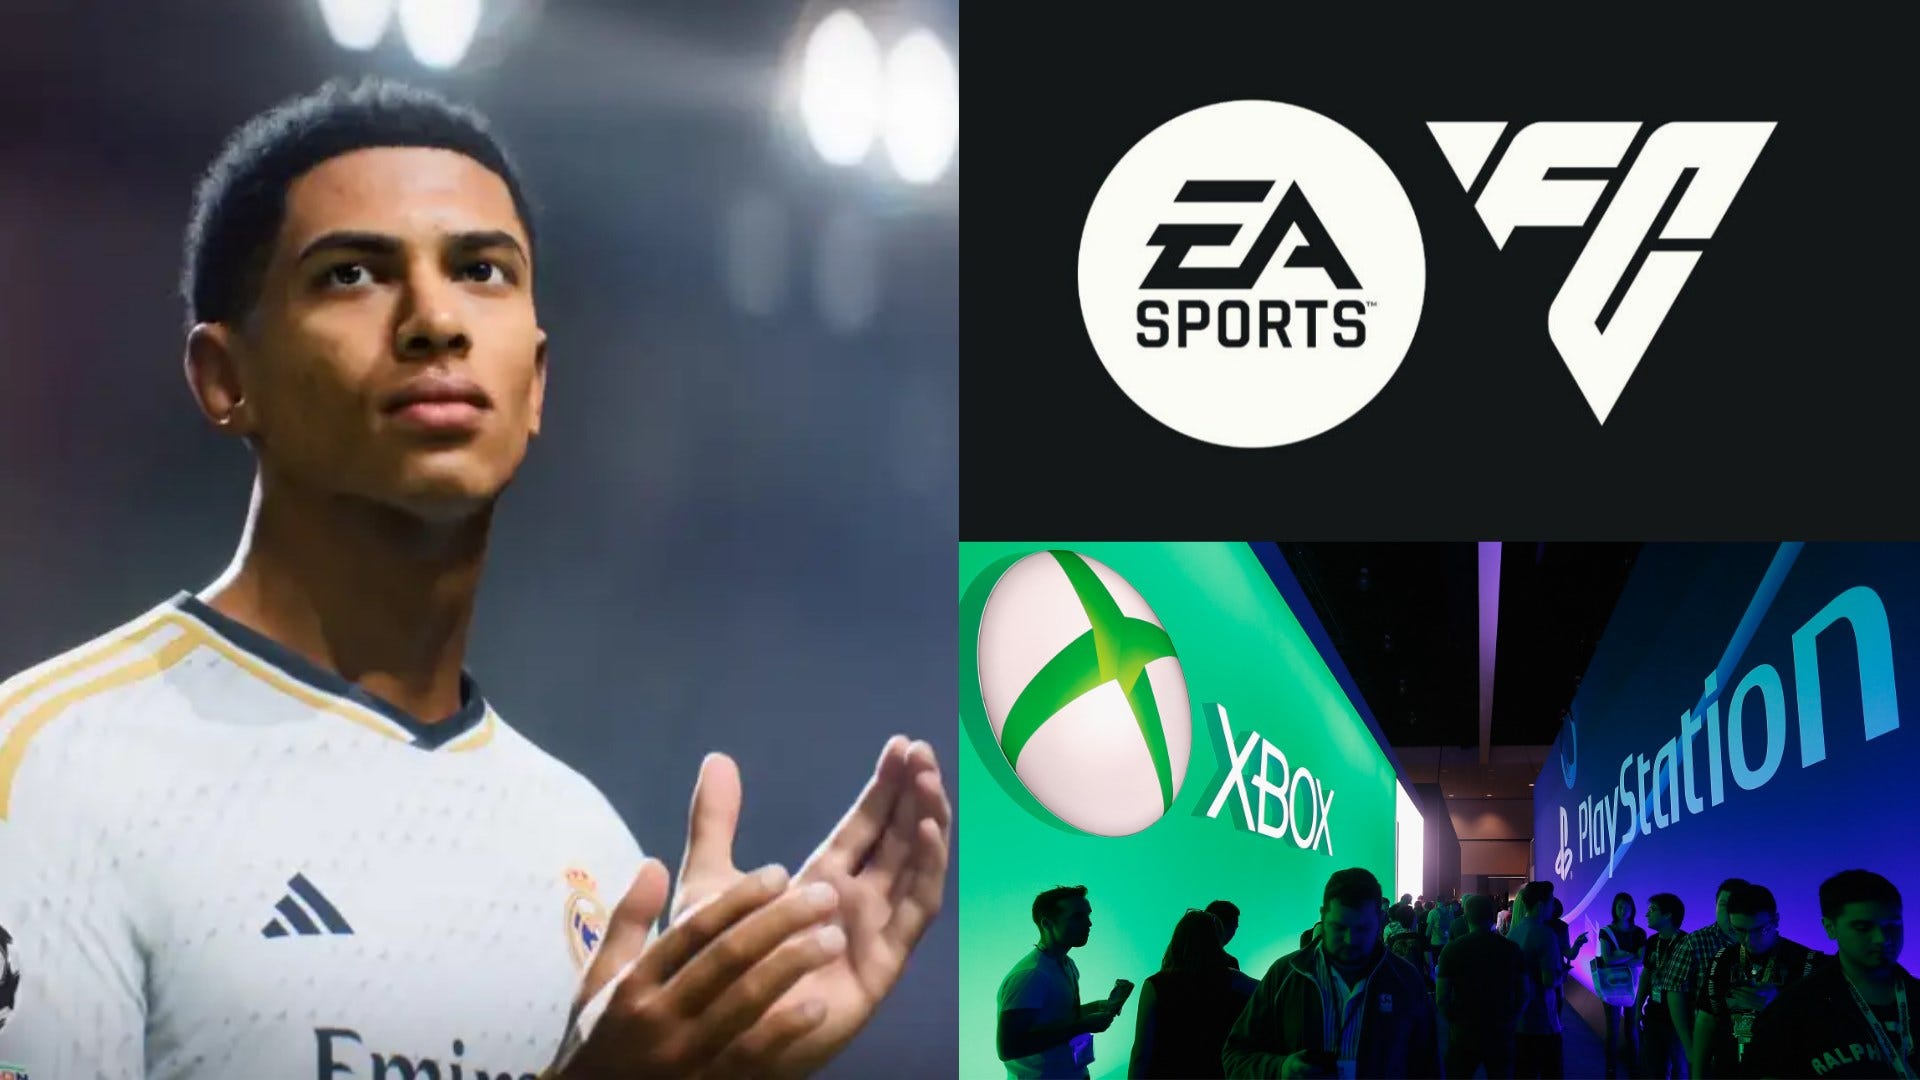 EA Help on X: Ready to go Pro? Upgrading your EA Play for PC